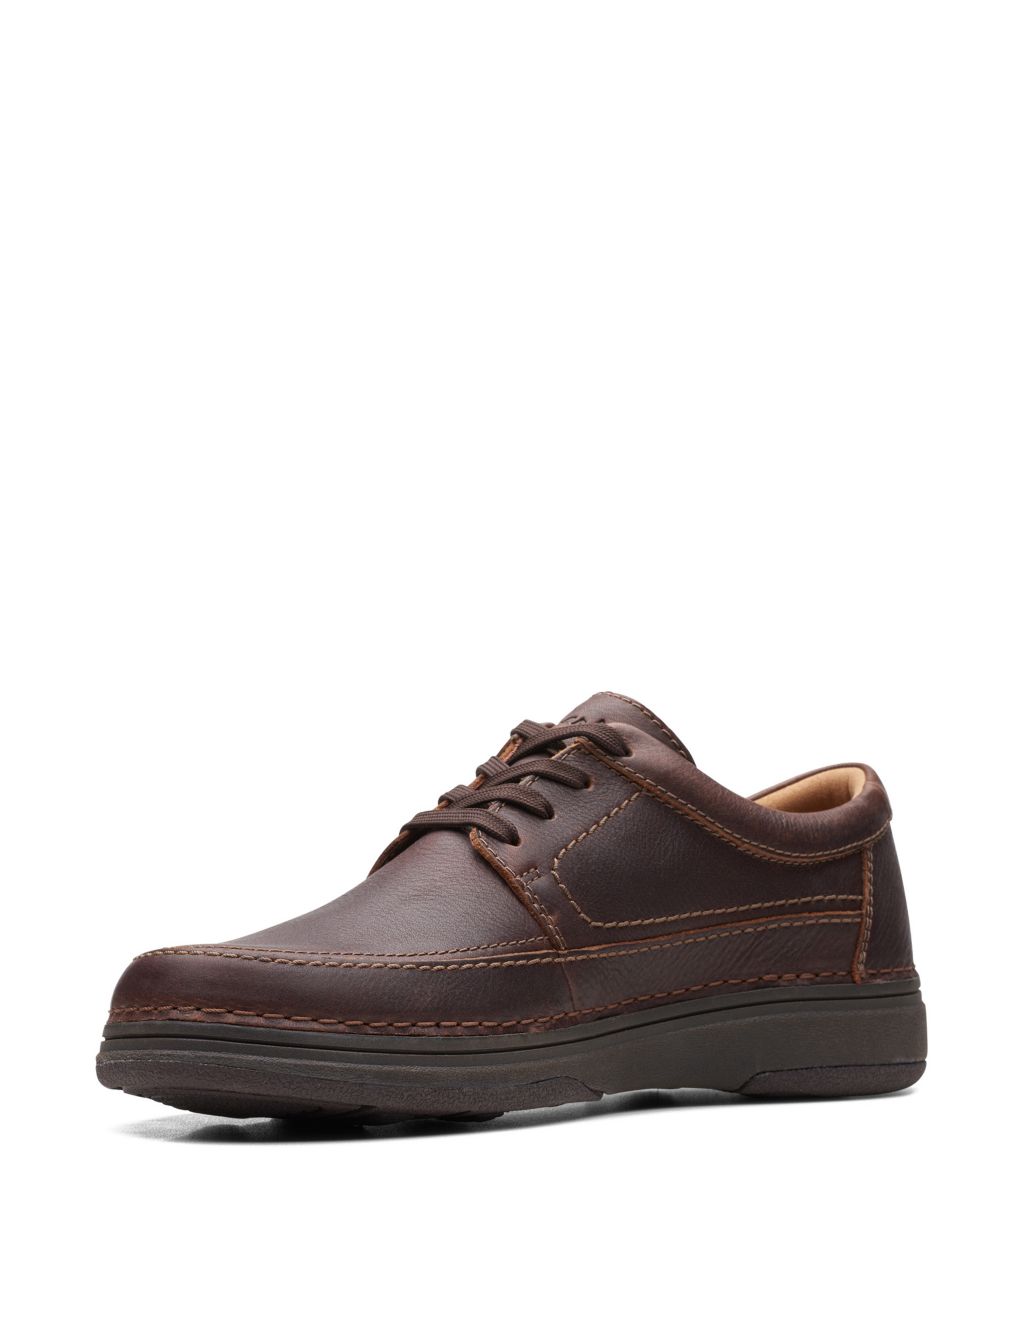 Leather Casual Shoes image 4